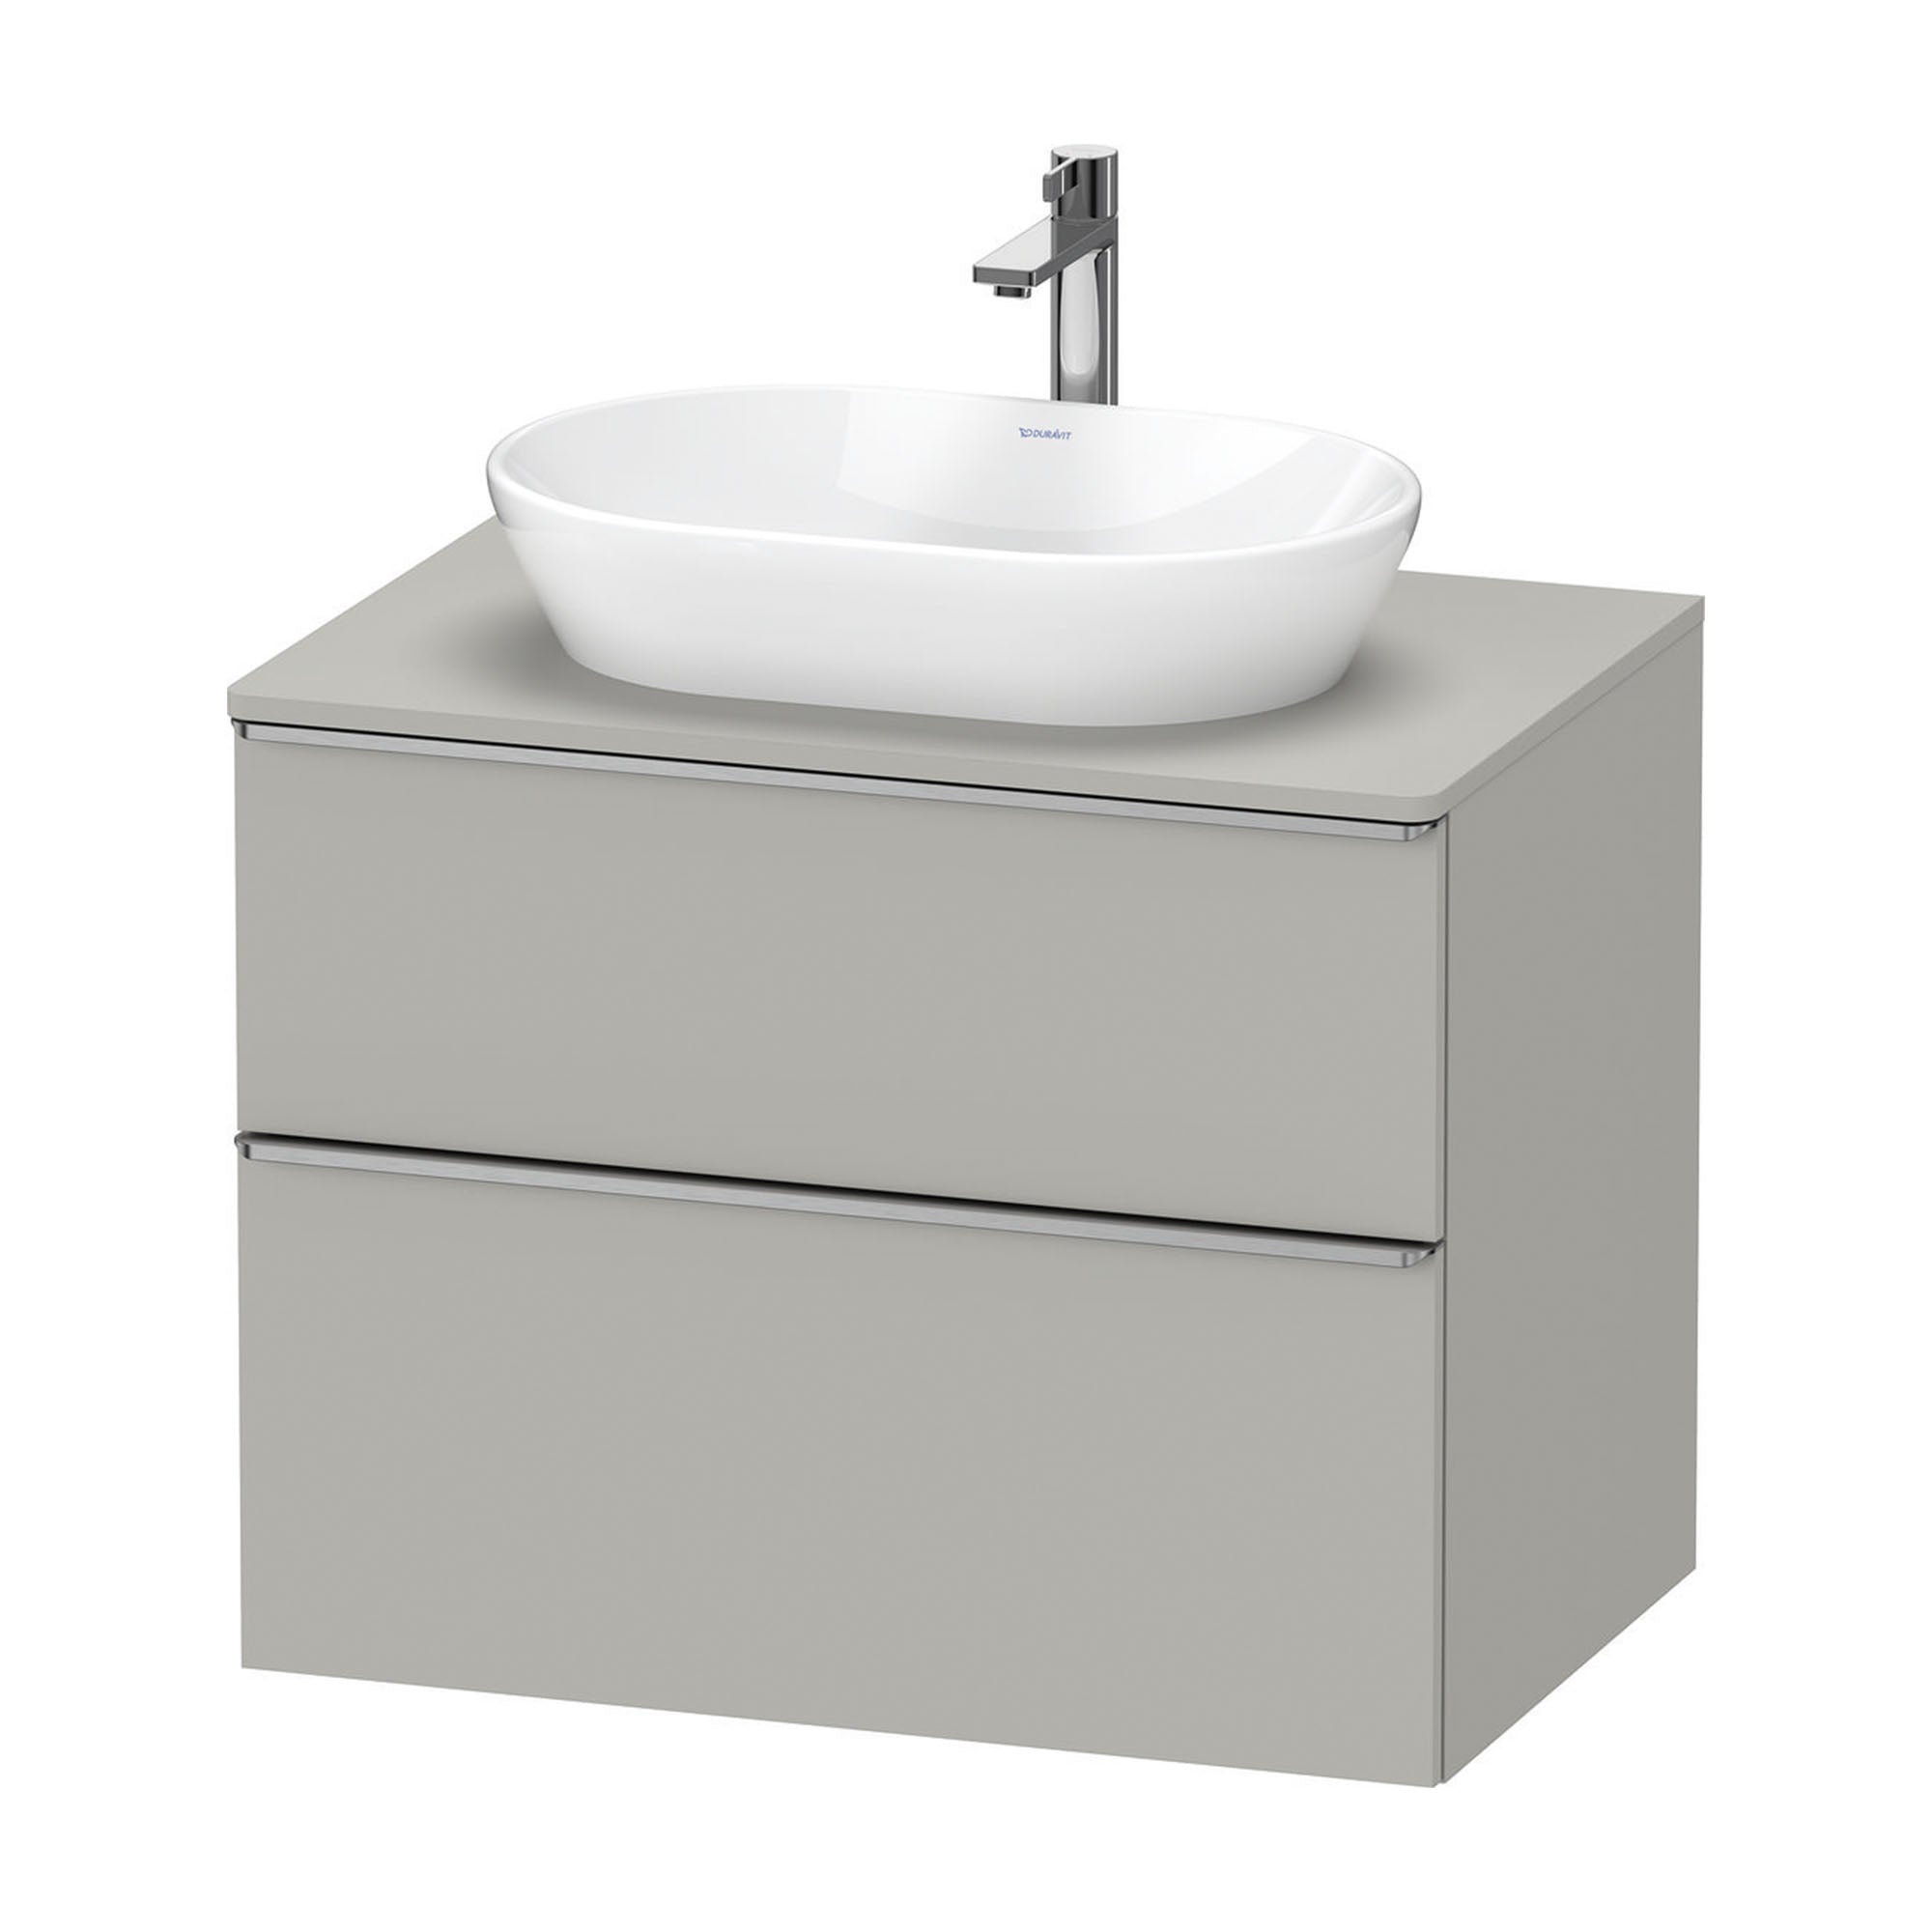 duravit d-neo 800 wall mounted vanity unit with worktop concrete grey stainless steel handles